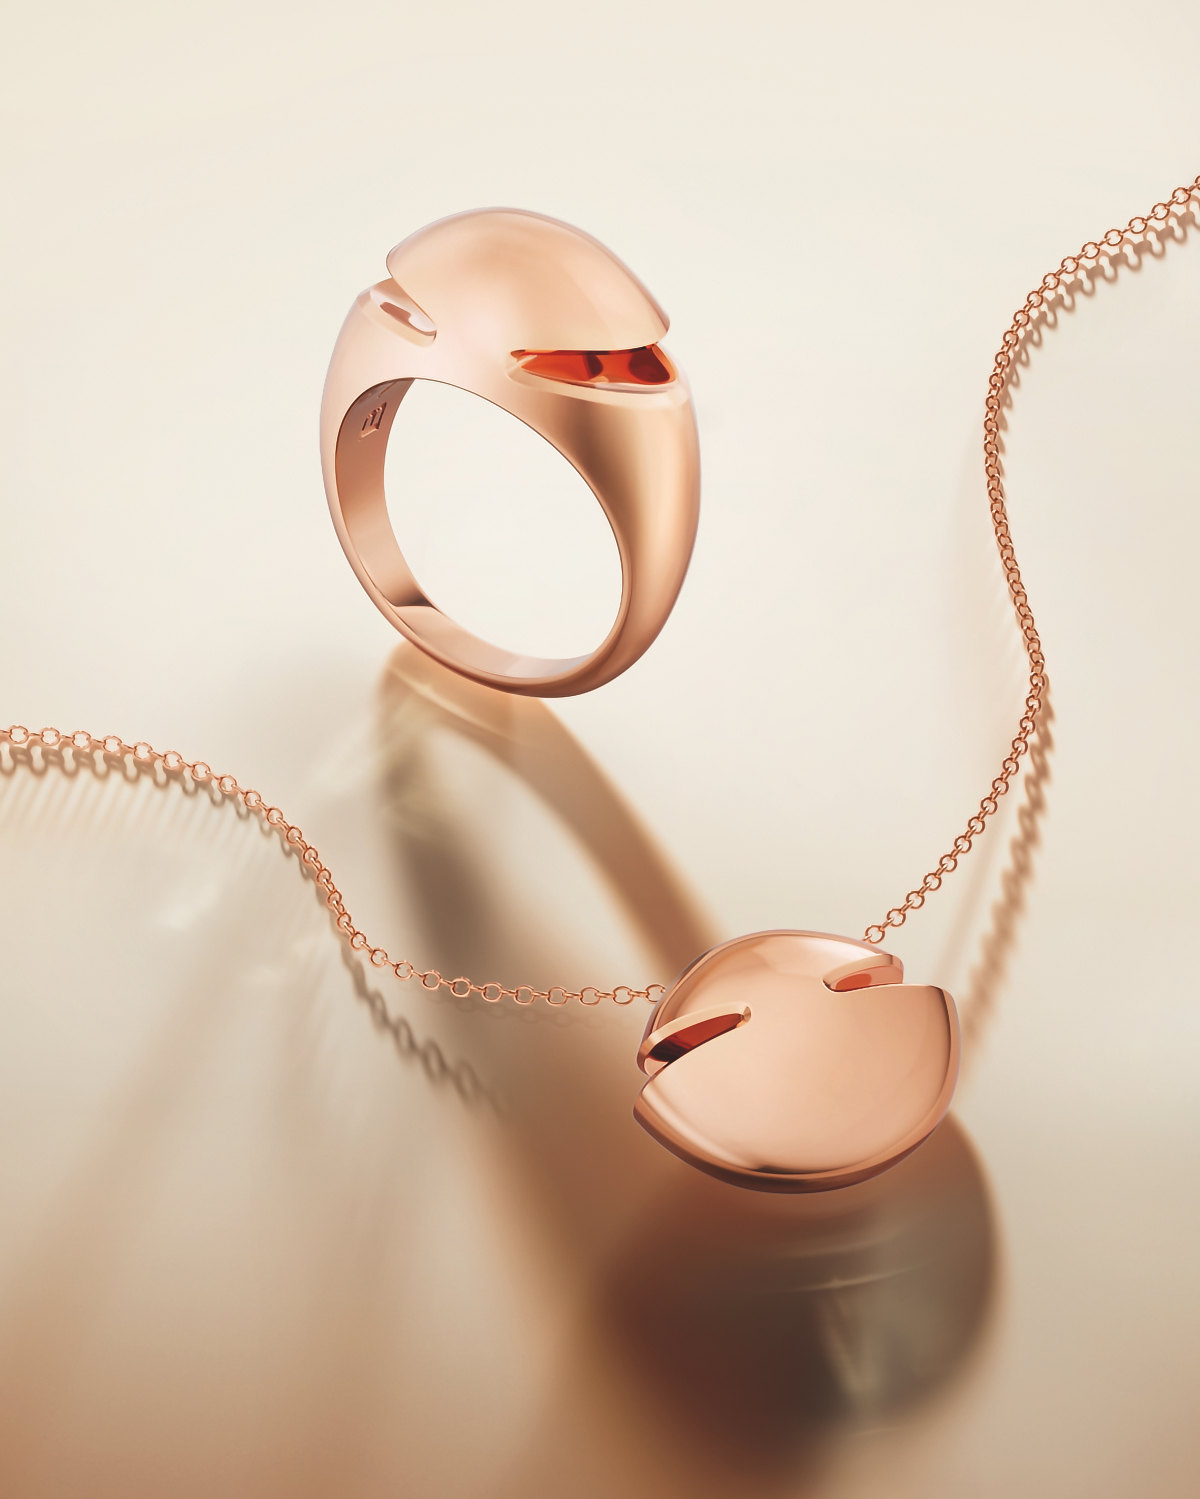 Bulgari Introduces Its New Cabochon Jewelry Collection